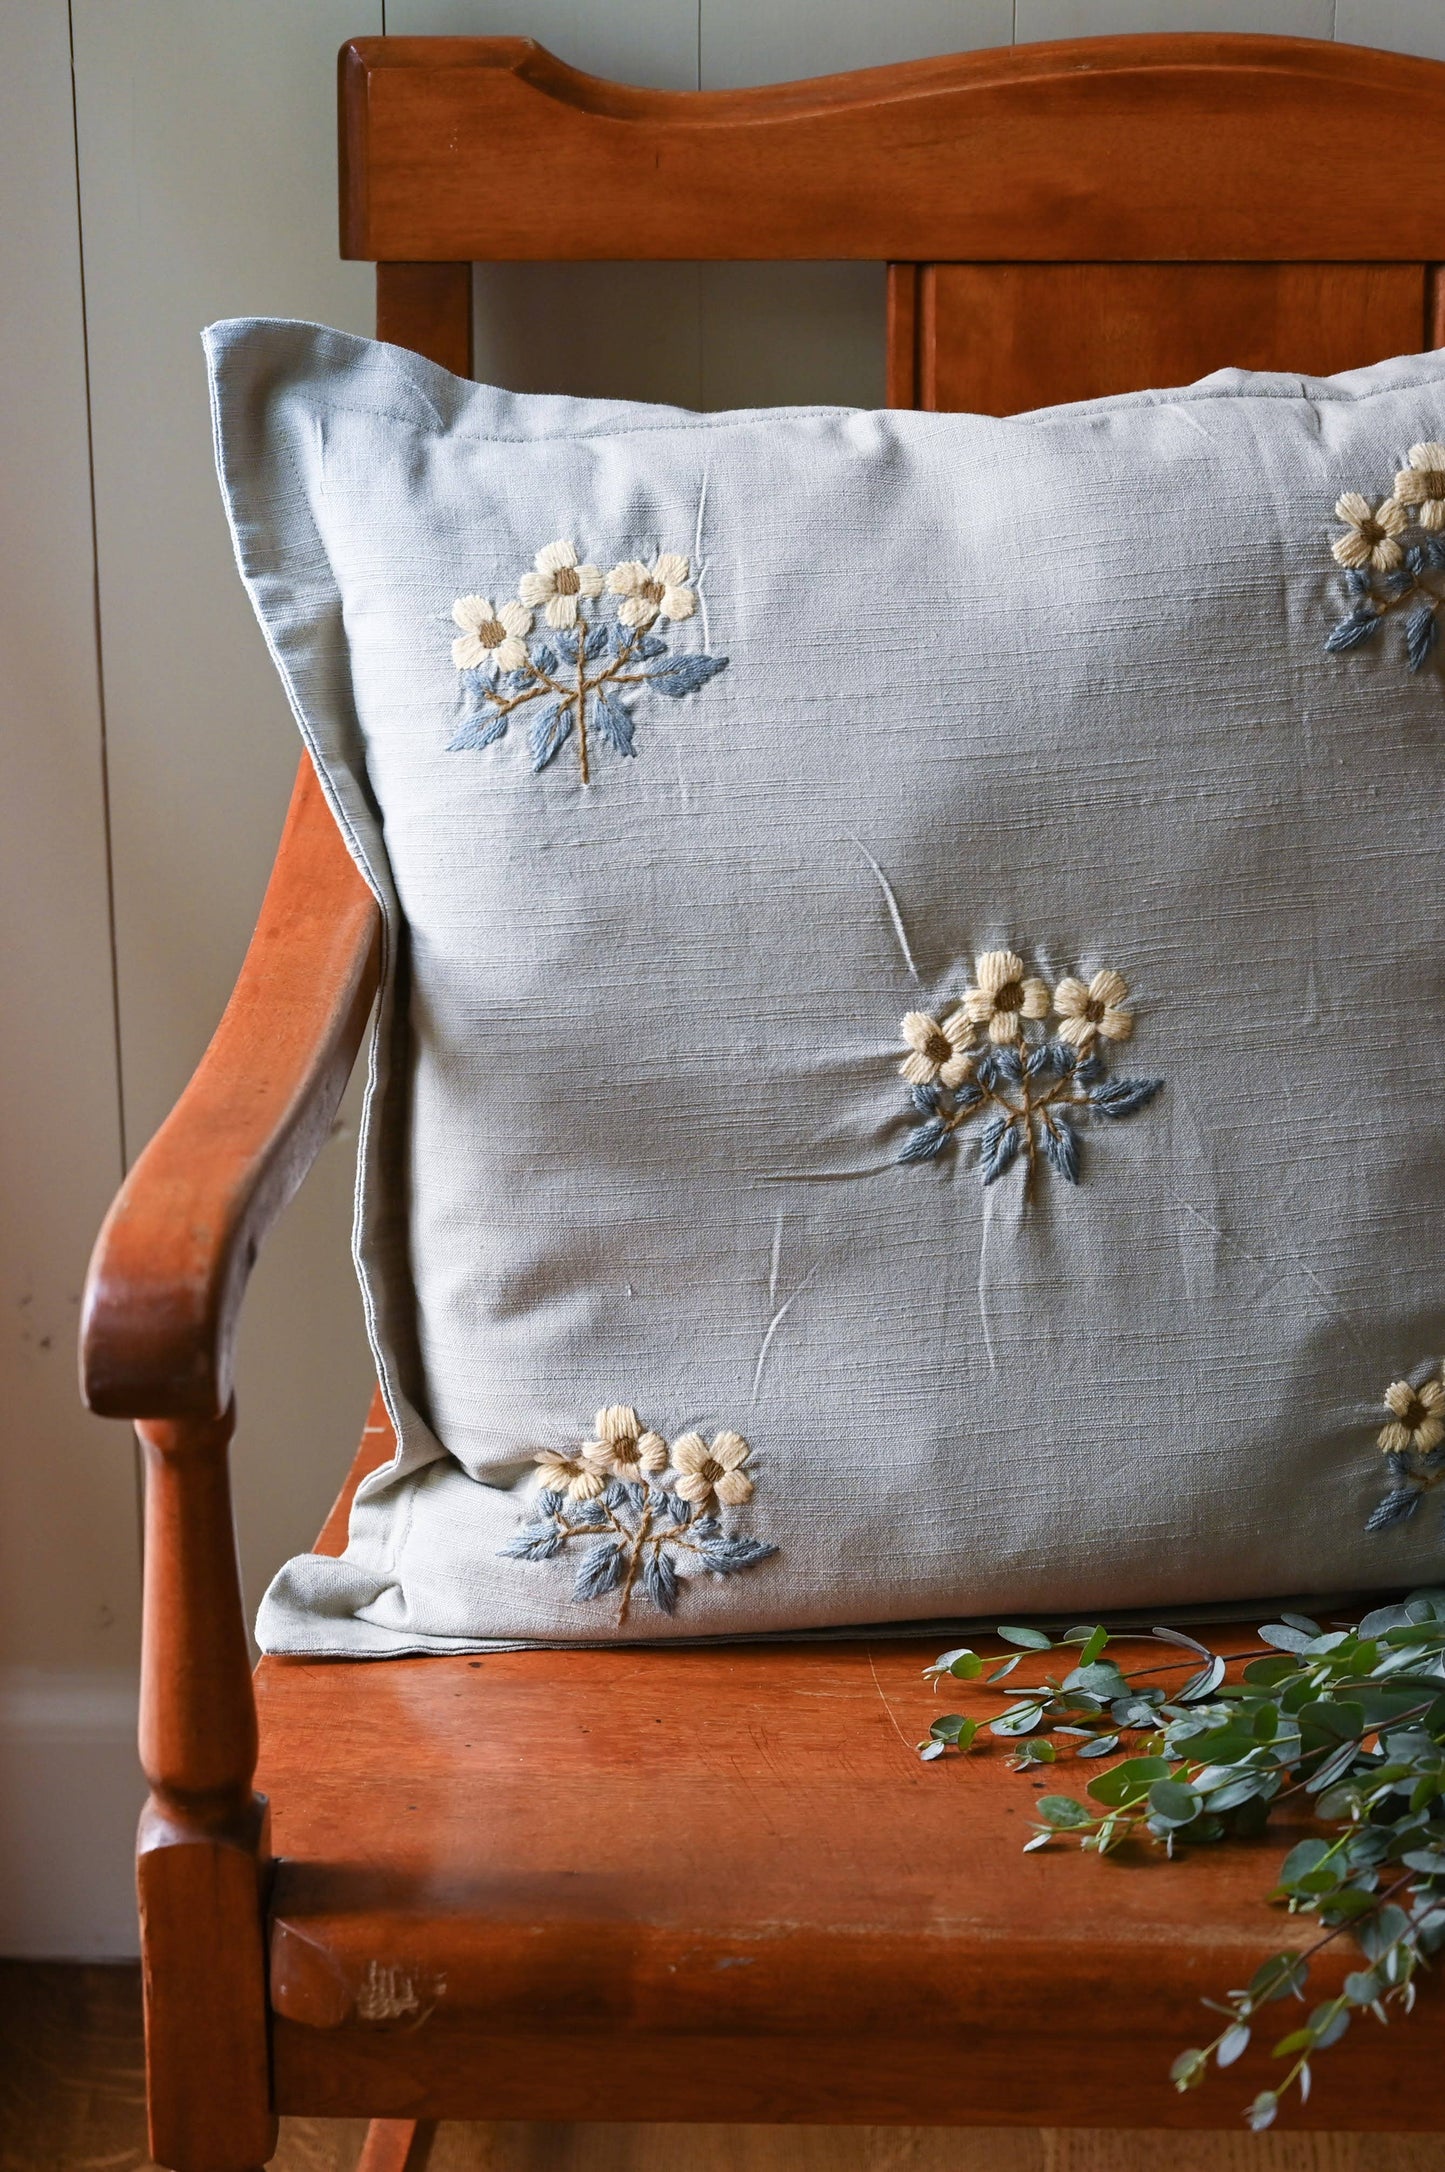 Florence Pillow Cover